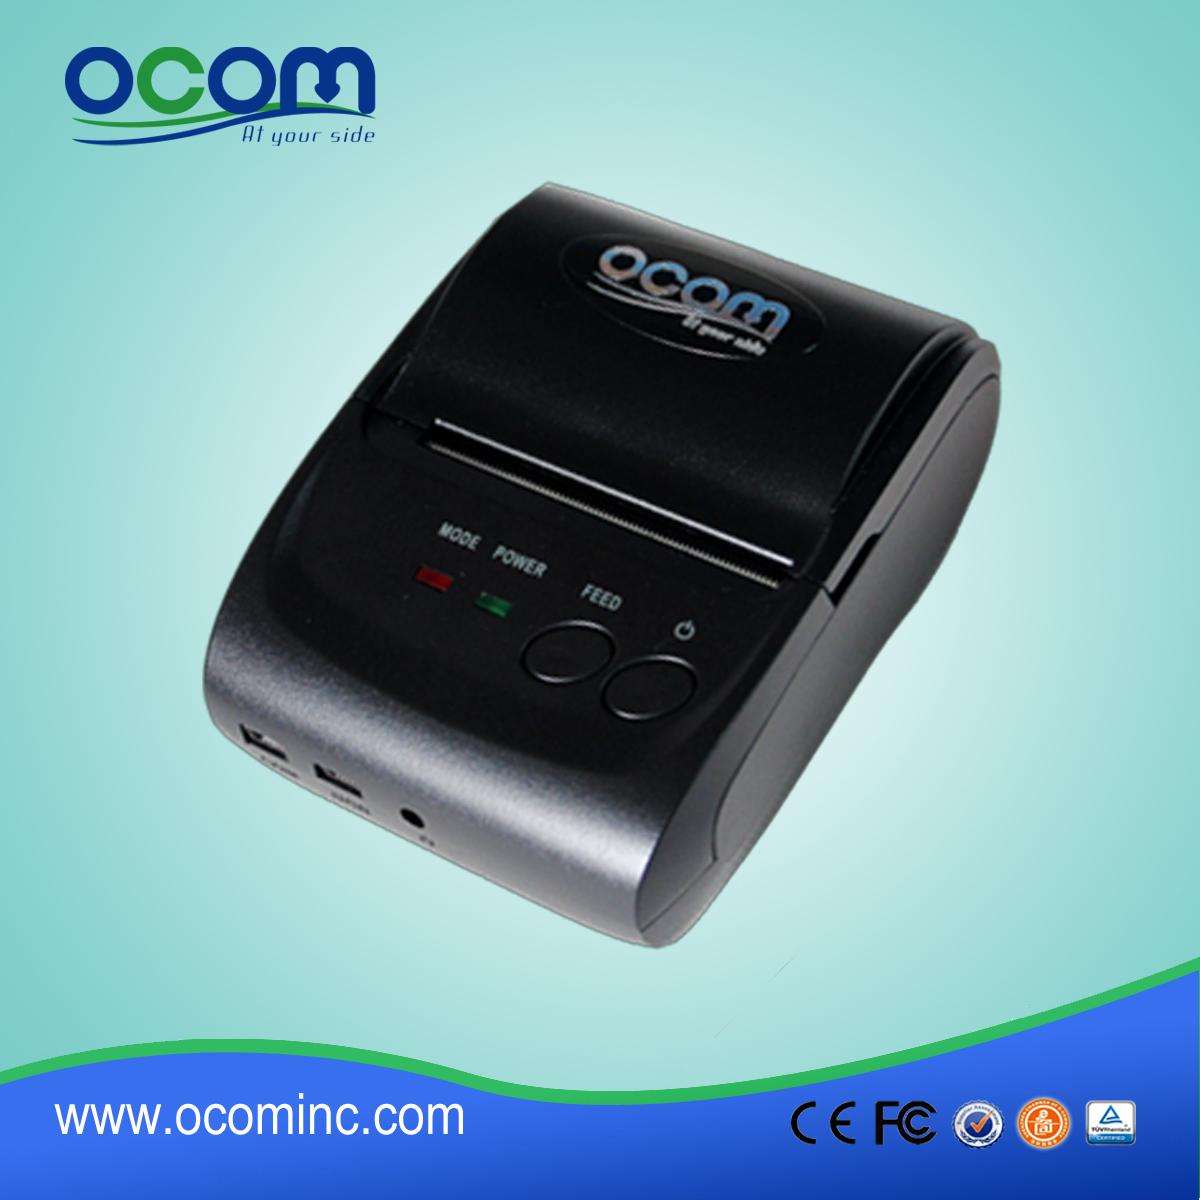 OCPP-M05: 2015 hot draagbare android Bluetooth-printer, thermische printer module